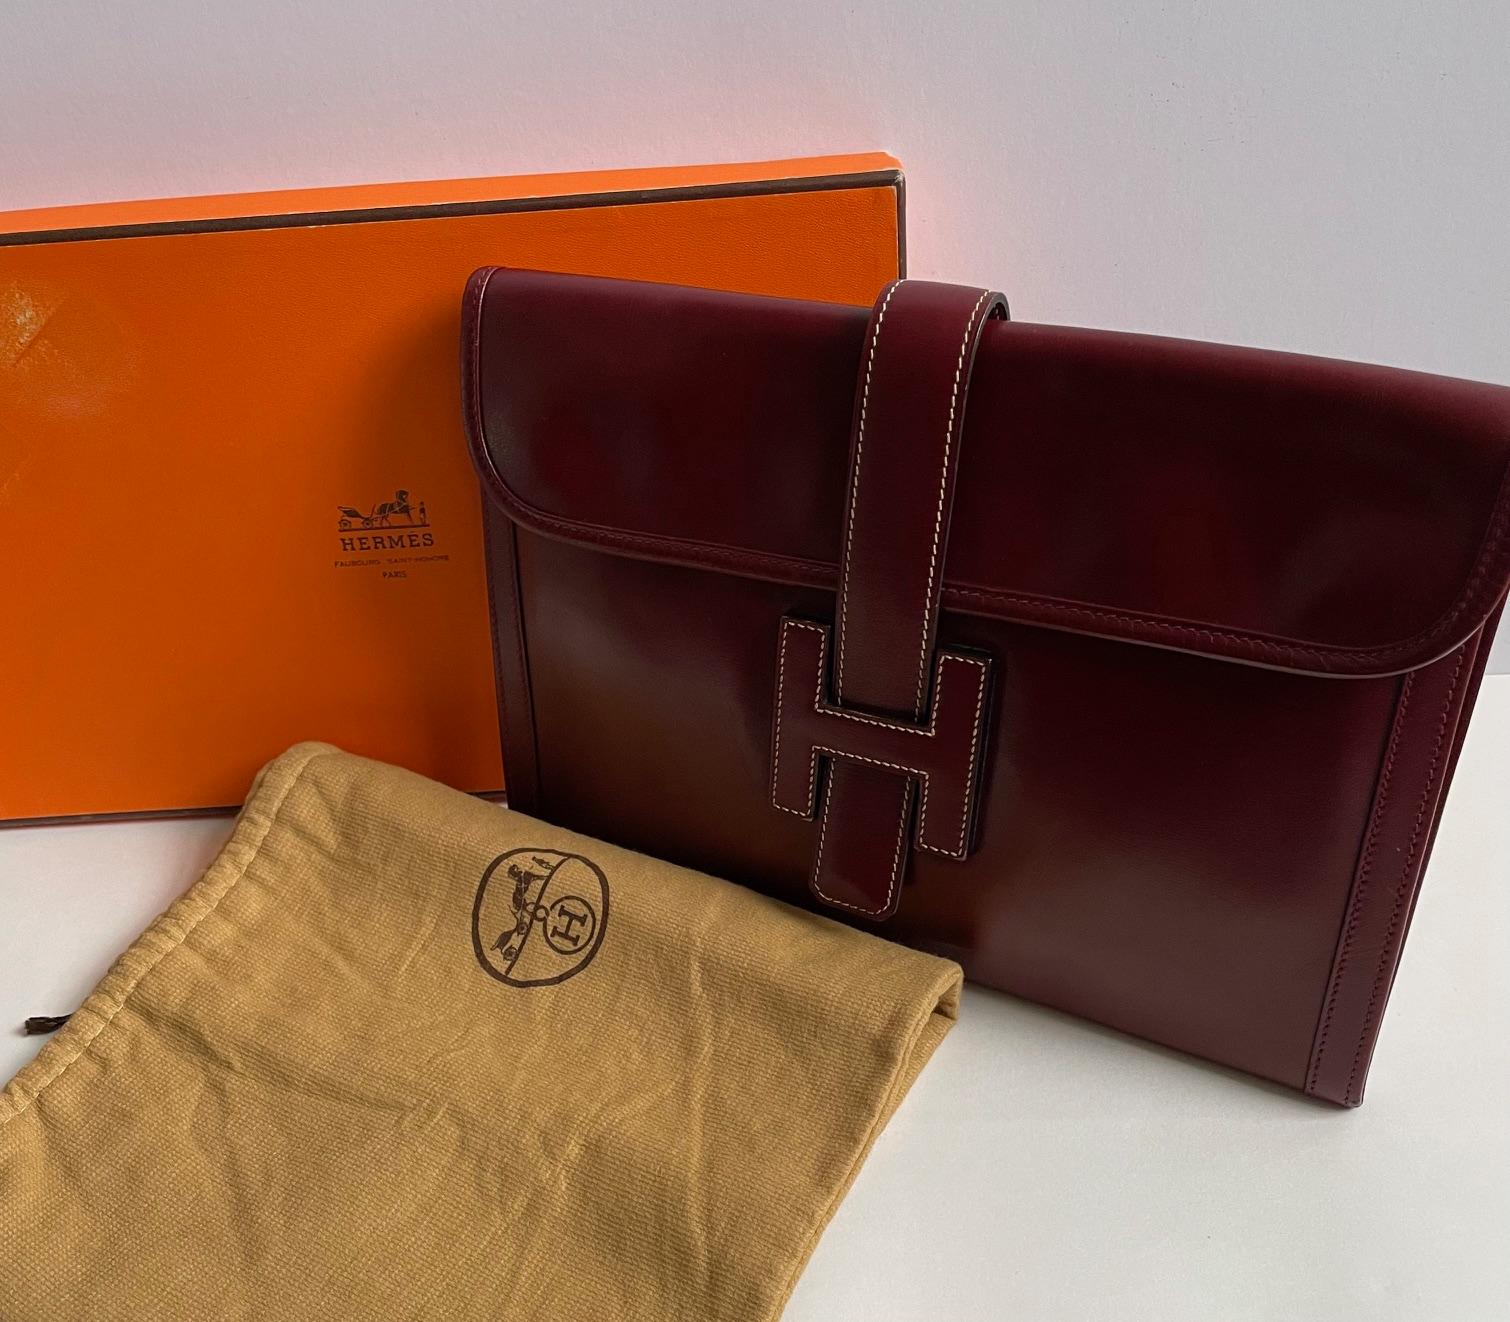 HERMÈS 1979 Jige Clutch Box Leather Vintage W/Box. A timeless vintage 1979 Hermès Jige pochette clutch in Burgundy deep red box leather with off-white stitching and saddle red stitching. Large H closure on the flap, off-white beige canvas interior